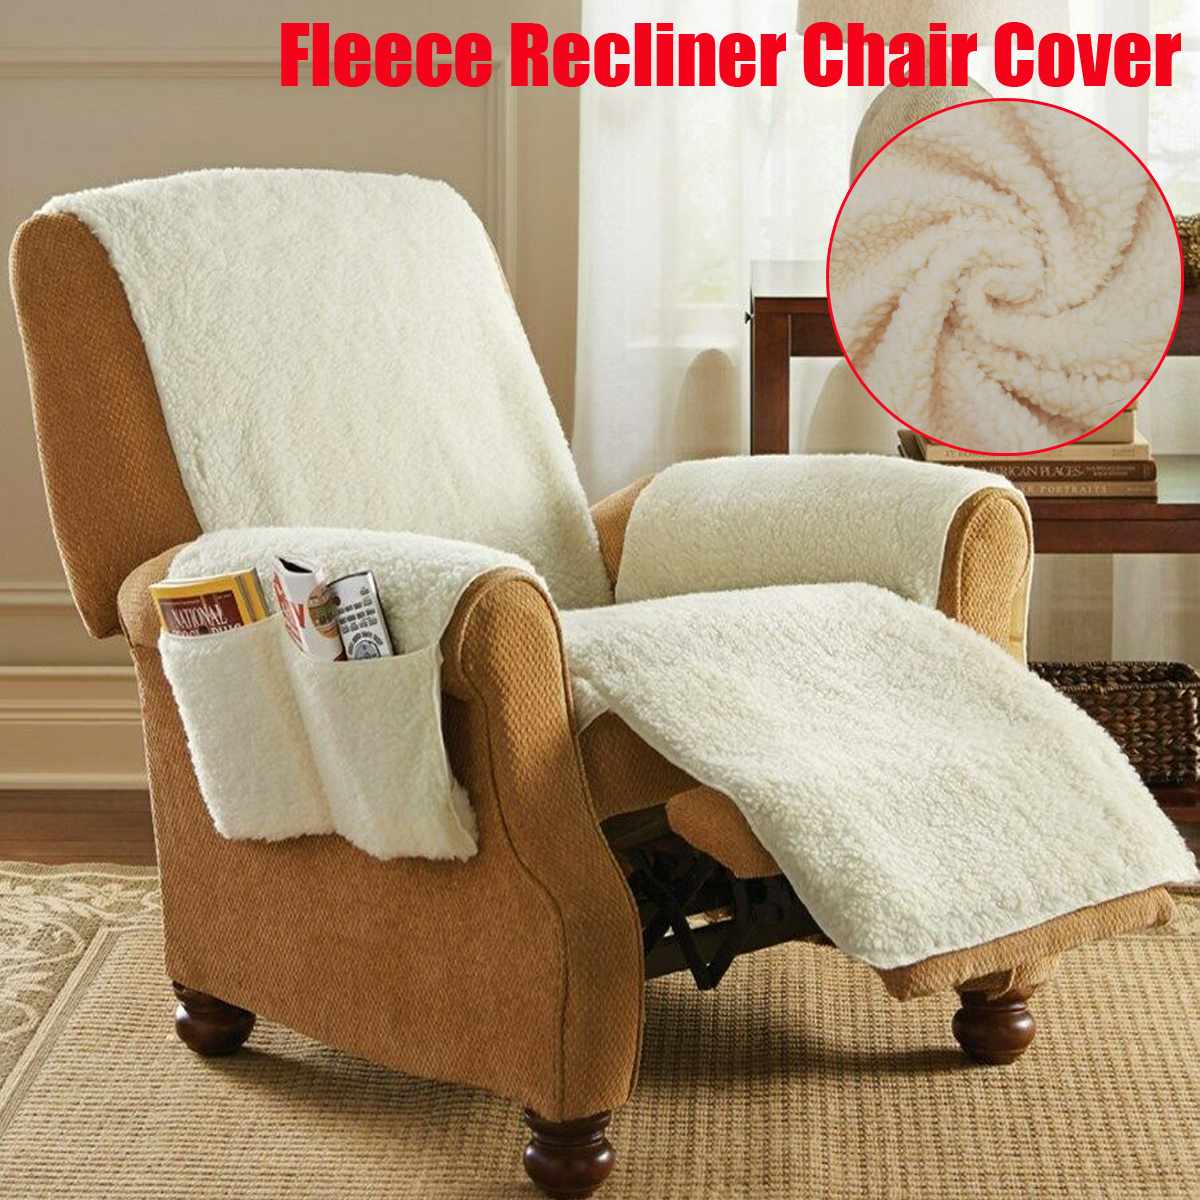 Fleece Sofa Couch Cover Recliner Chair Cover Pet Dog Kids Mat For Living Room Sofa Covers Furniture Protector